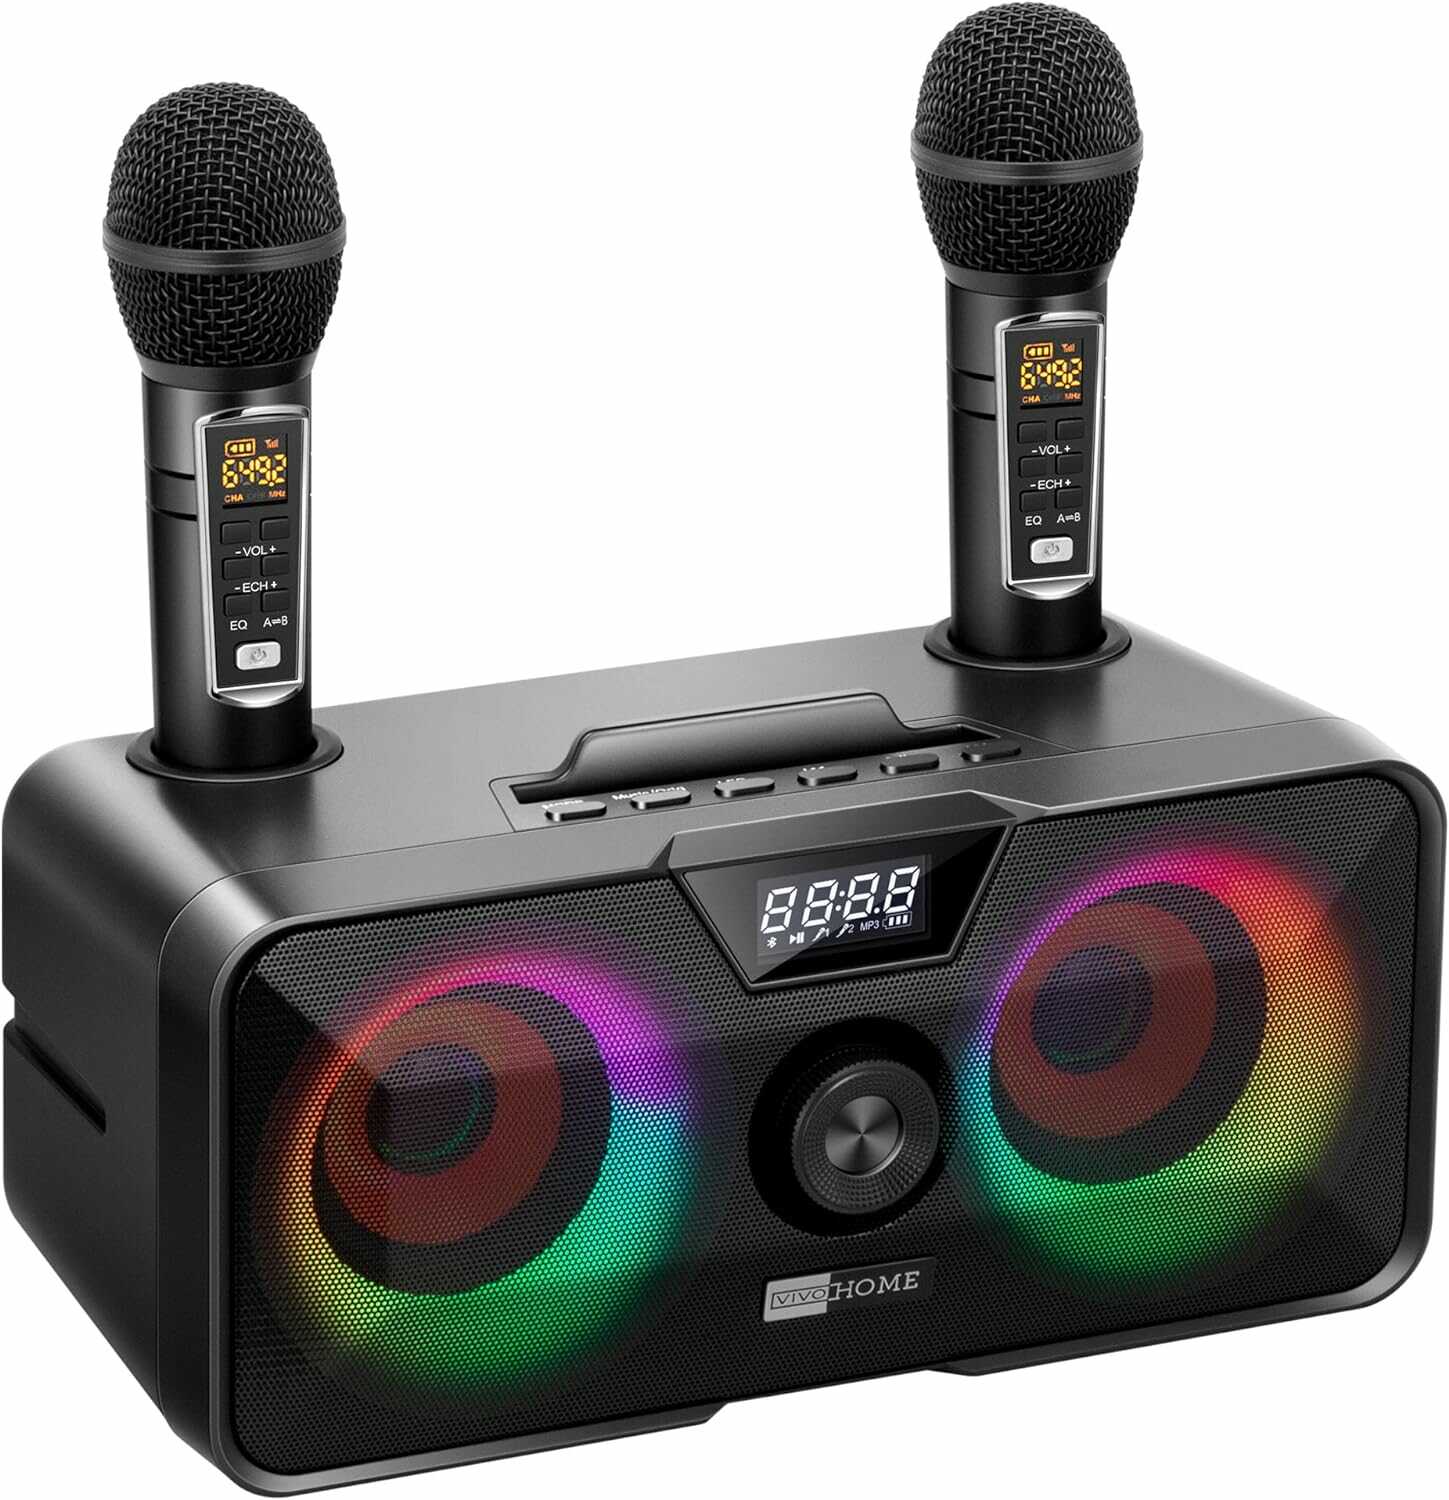  Karaoke Machine with 2 Microphones，Karaoke Machine for Adults  and Kids，Portable Mini Karaoke Speaker PA System,Support  Bluetooth/USB/AUX/TF, Karaoke Kit for TV,Home Party, Meeting,Outdoor  (Green) : Musical Instruments